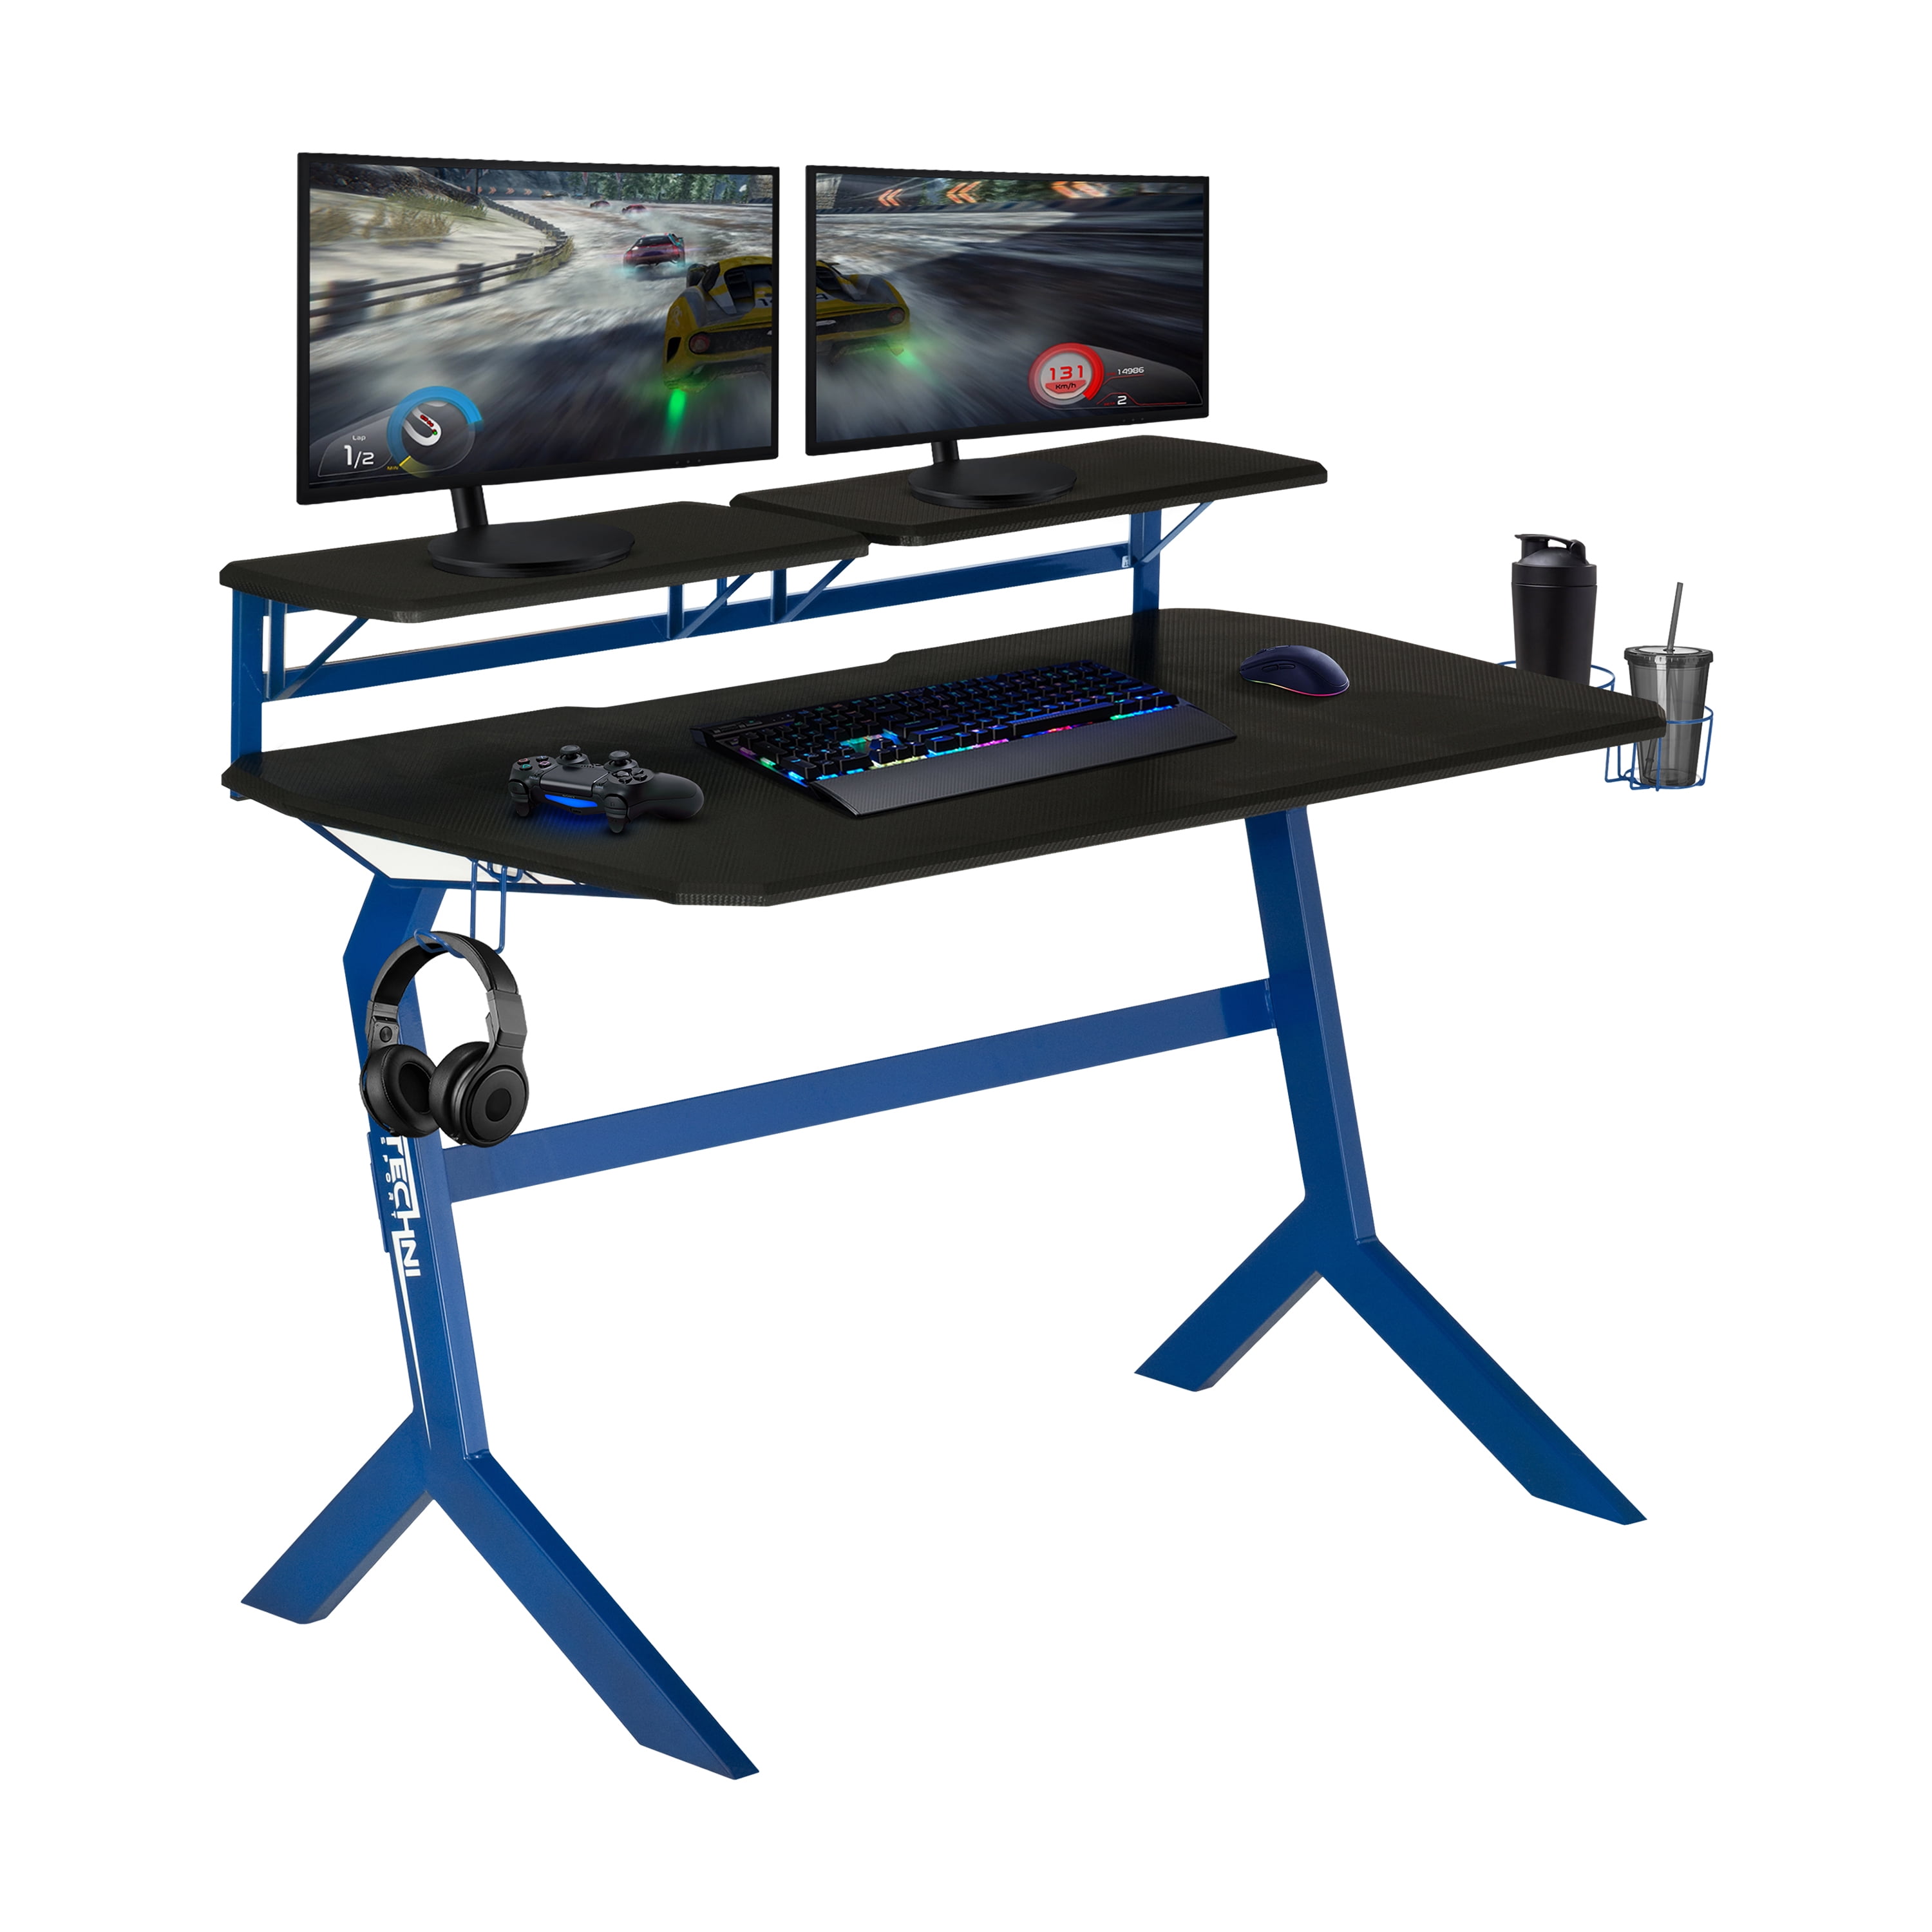 PC gaming setup - Coolblue - Before 23:59, delivered tomorrow